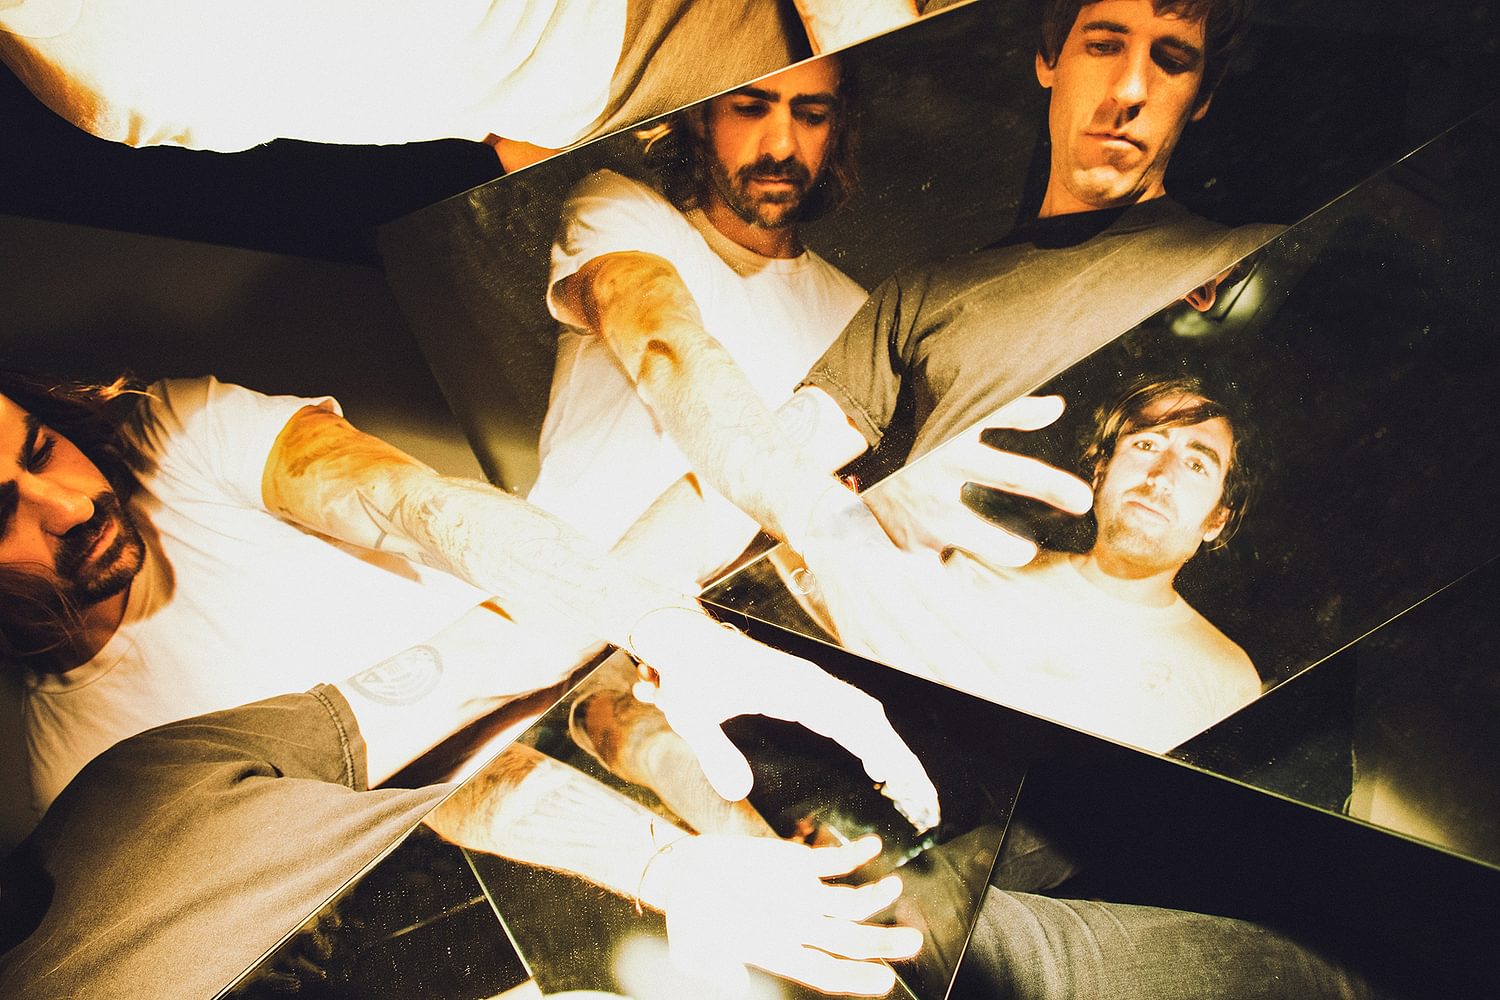 A Place to Bury Strangers stream new single ‘We’ve Come So Far’